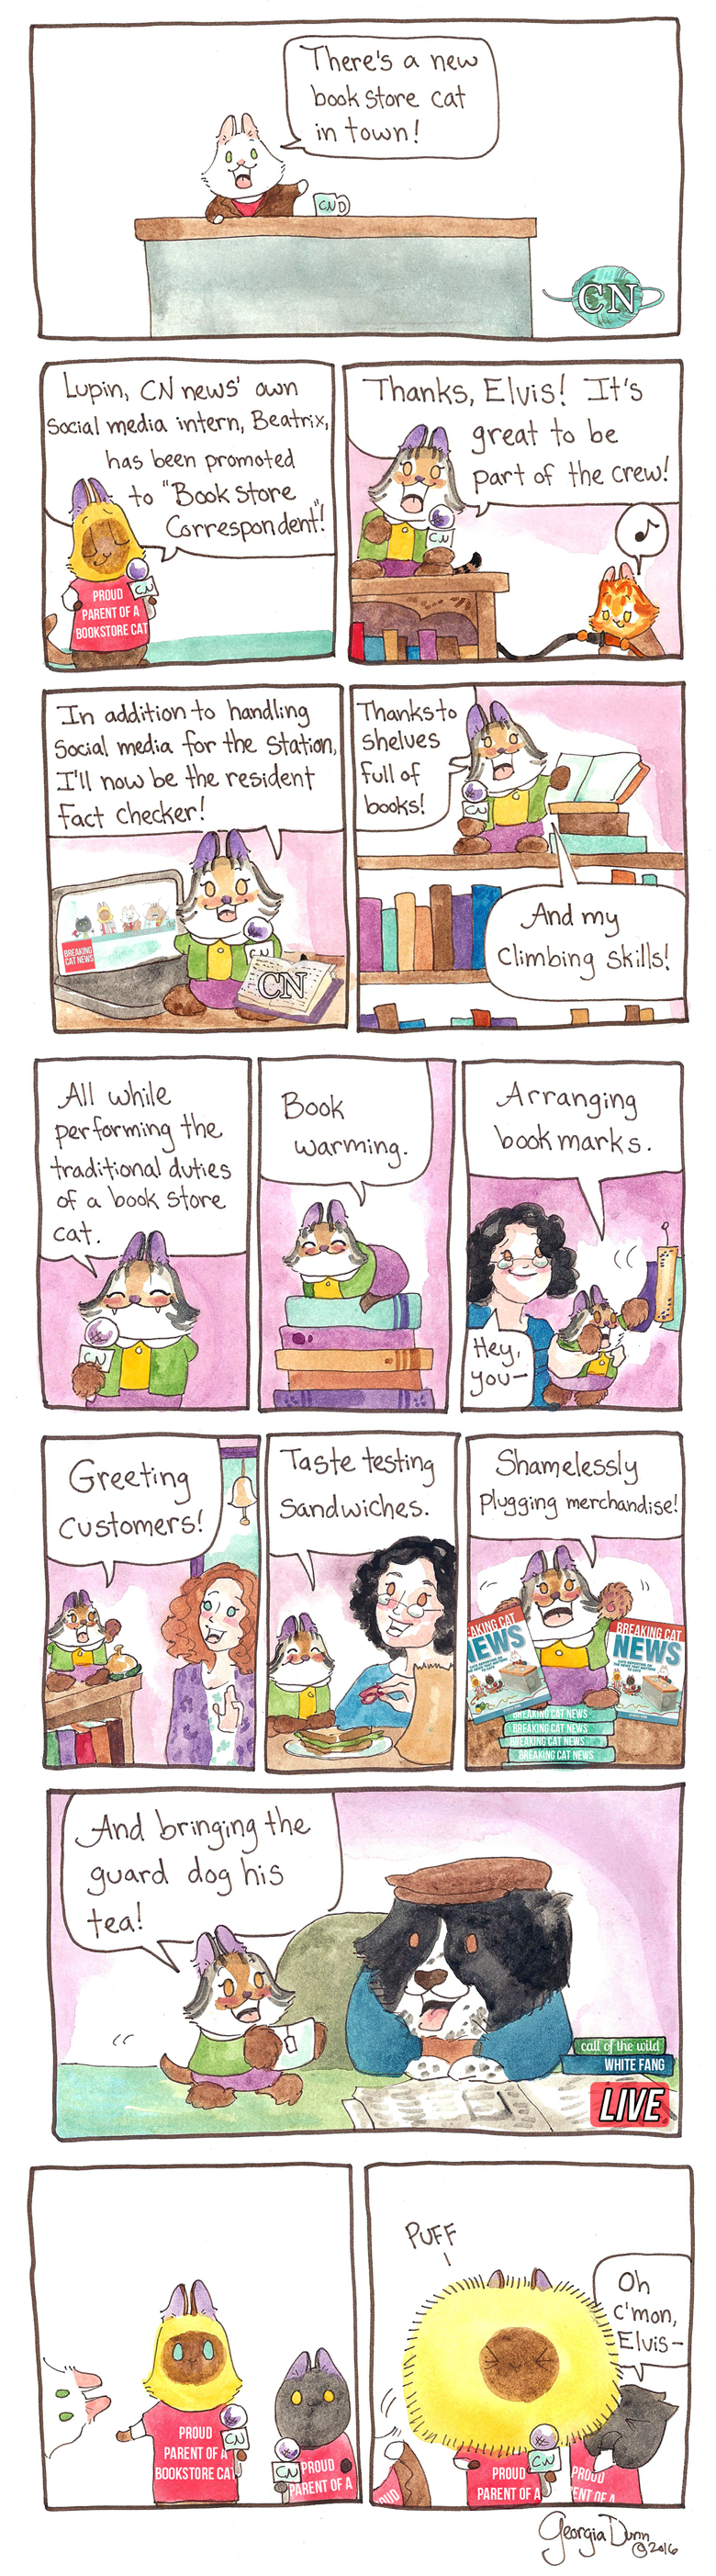 There’s a new bookstore cat in town!